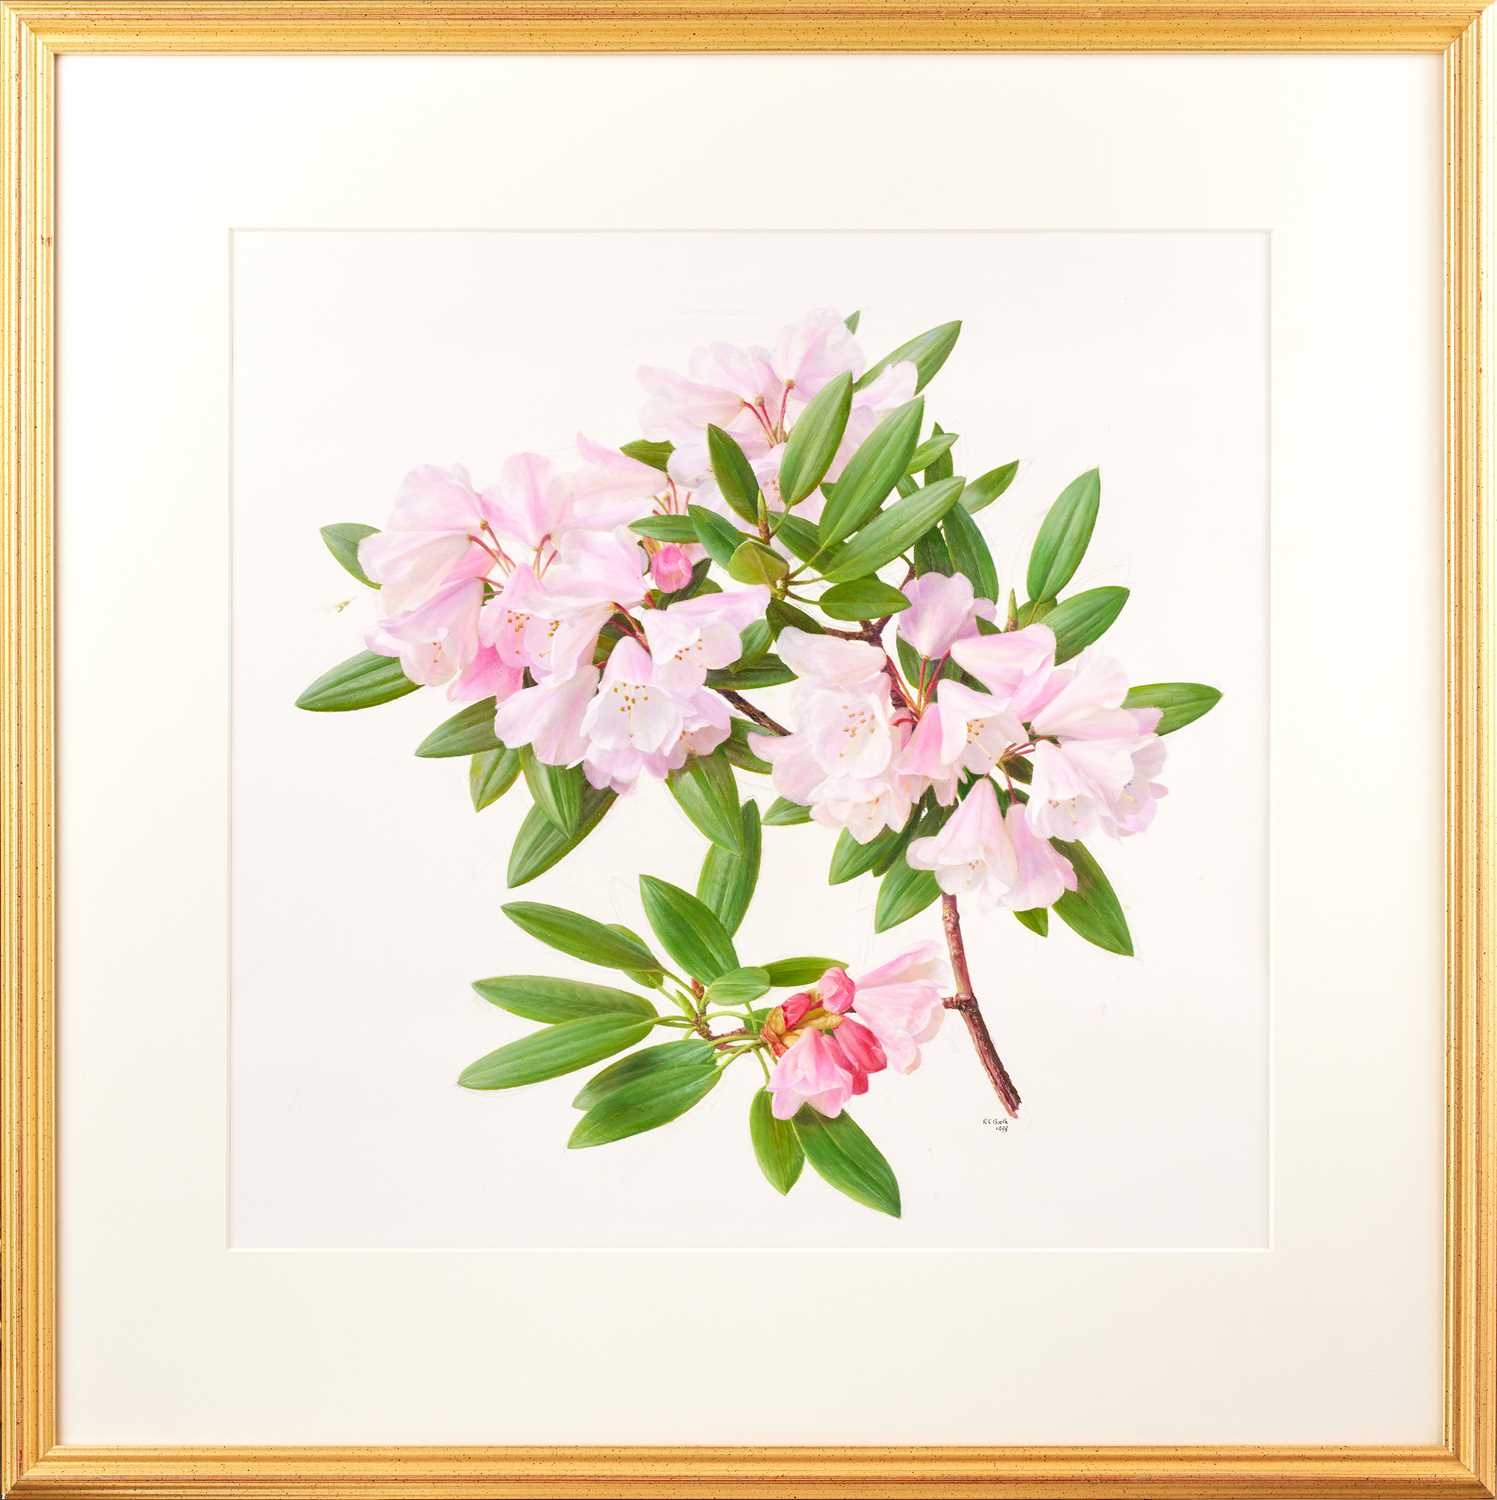 Raymond Booth (1929-2015) “Rhododendron Maculiferum Anwheiense” Signed and dated 1998, oil on paper, - Image 2 of 3